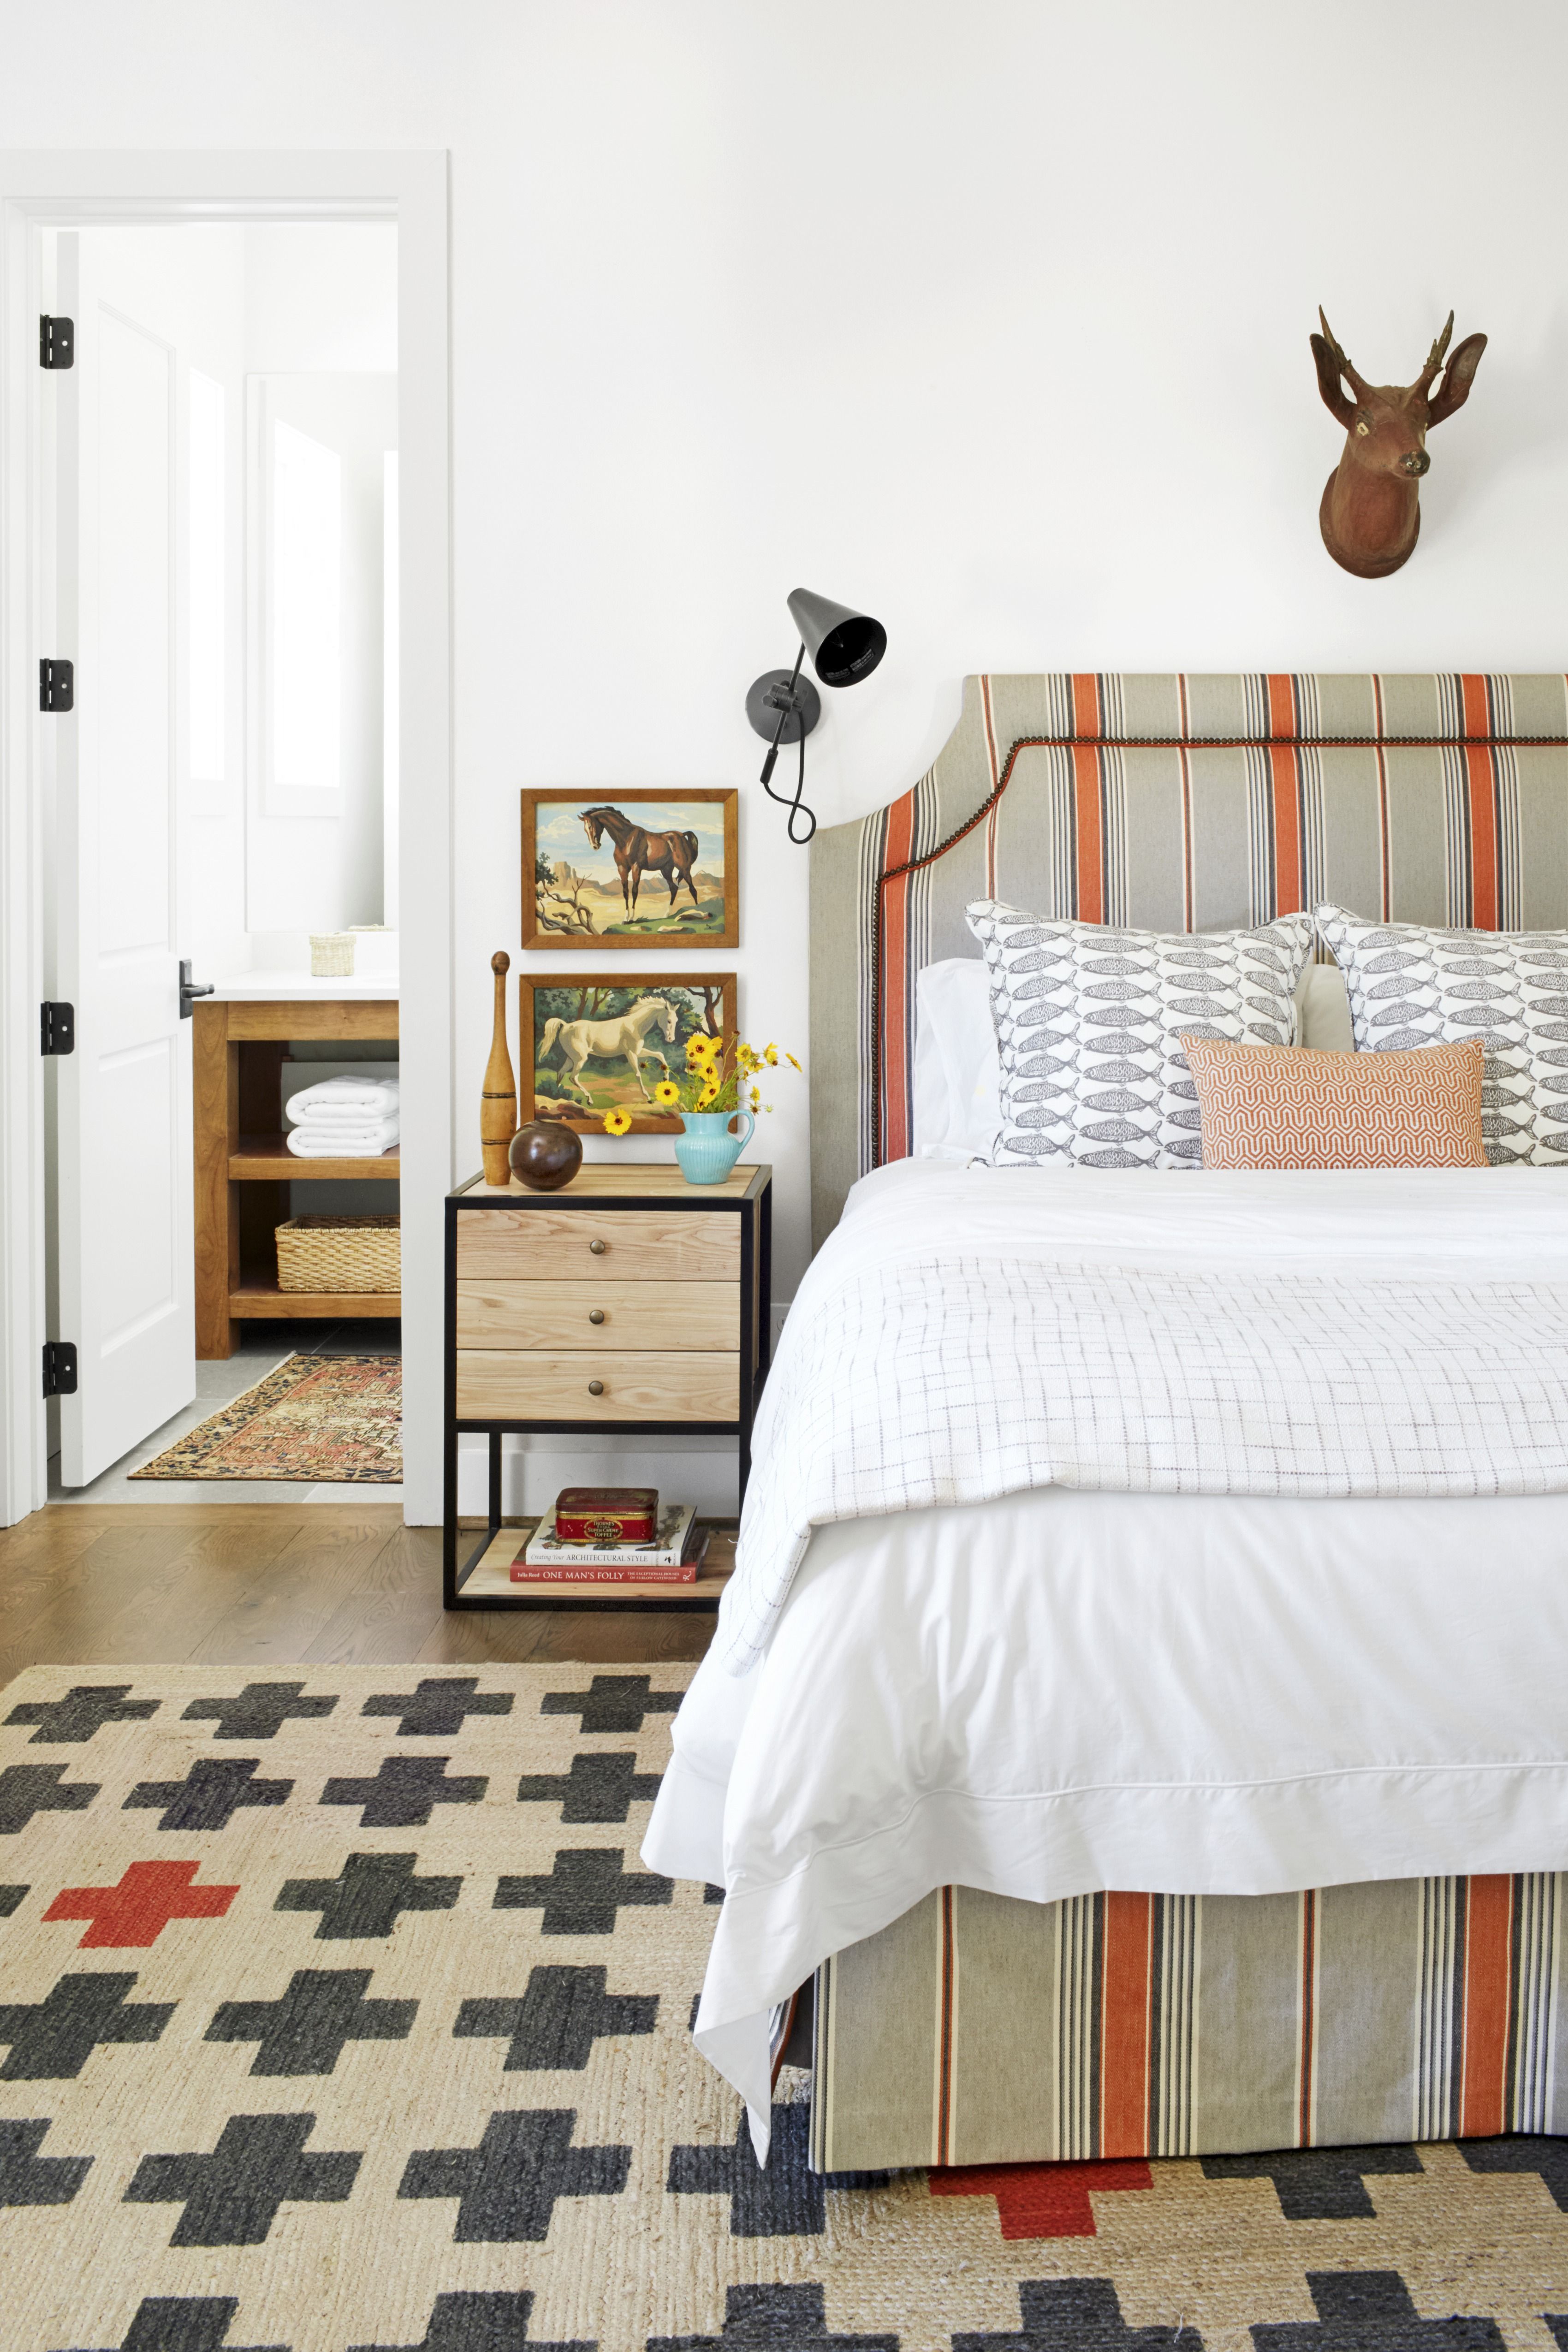 An Updated Take on Decorating with Quilts